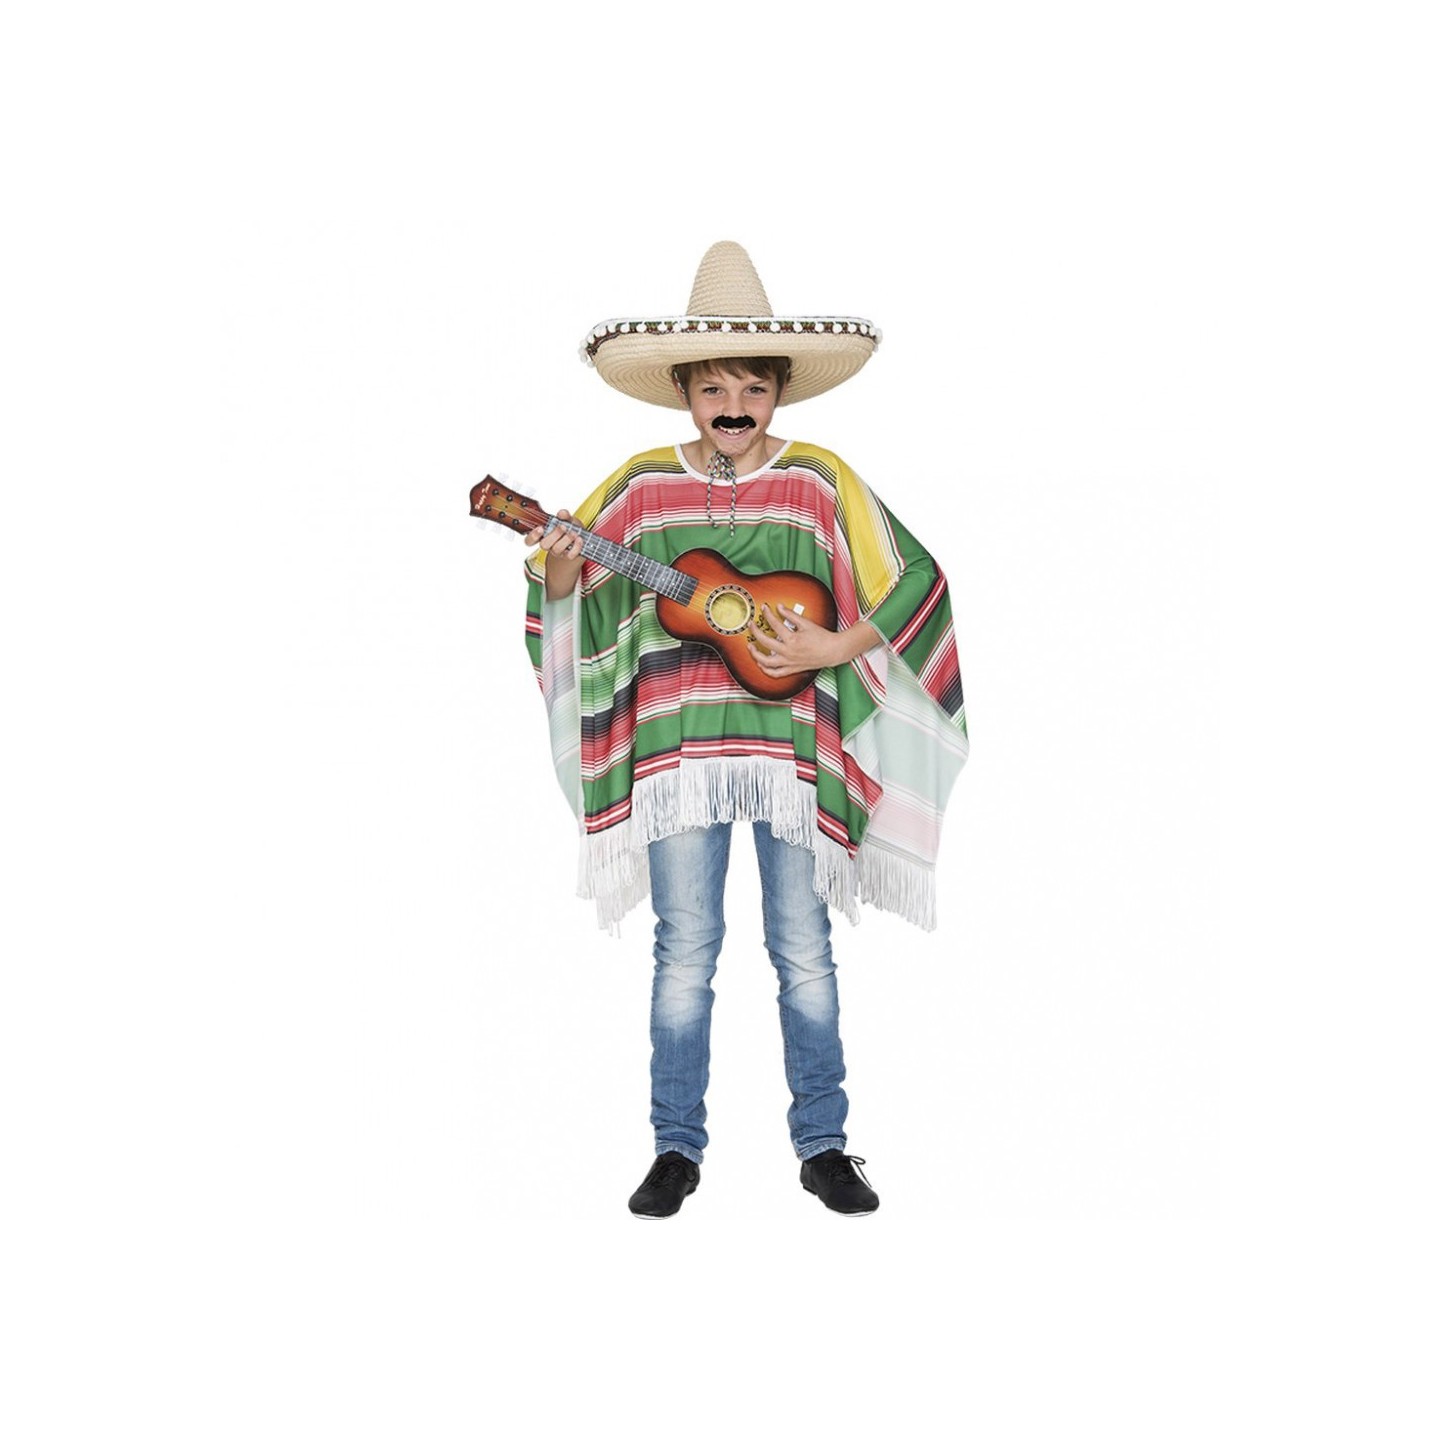 Mexicaanse poncho kind kopen carnaval